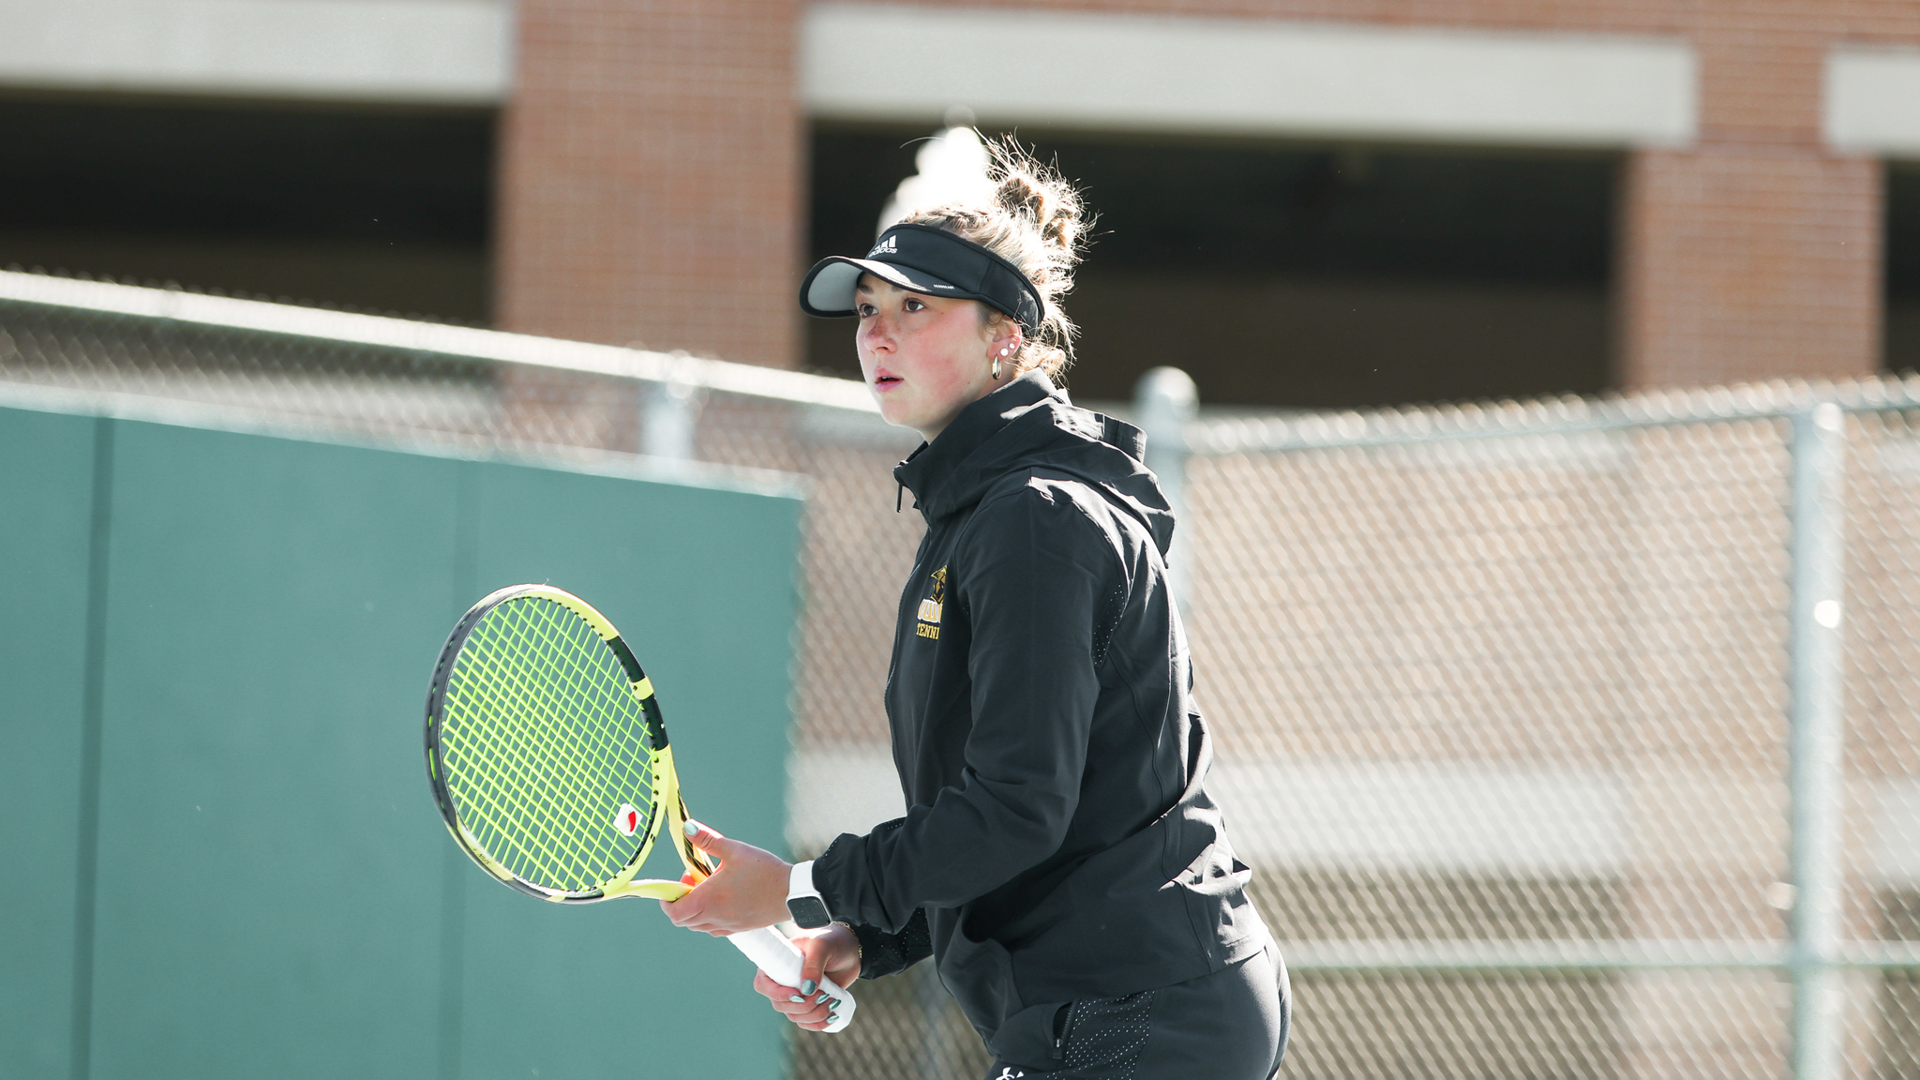 Jameson Gregory picked up wins in the No. 3 doubles and No. 4 singles flights on Friday